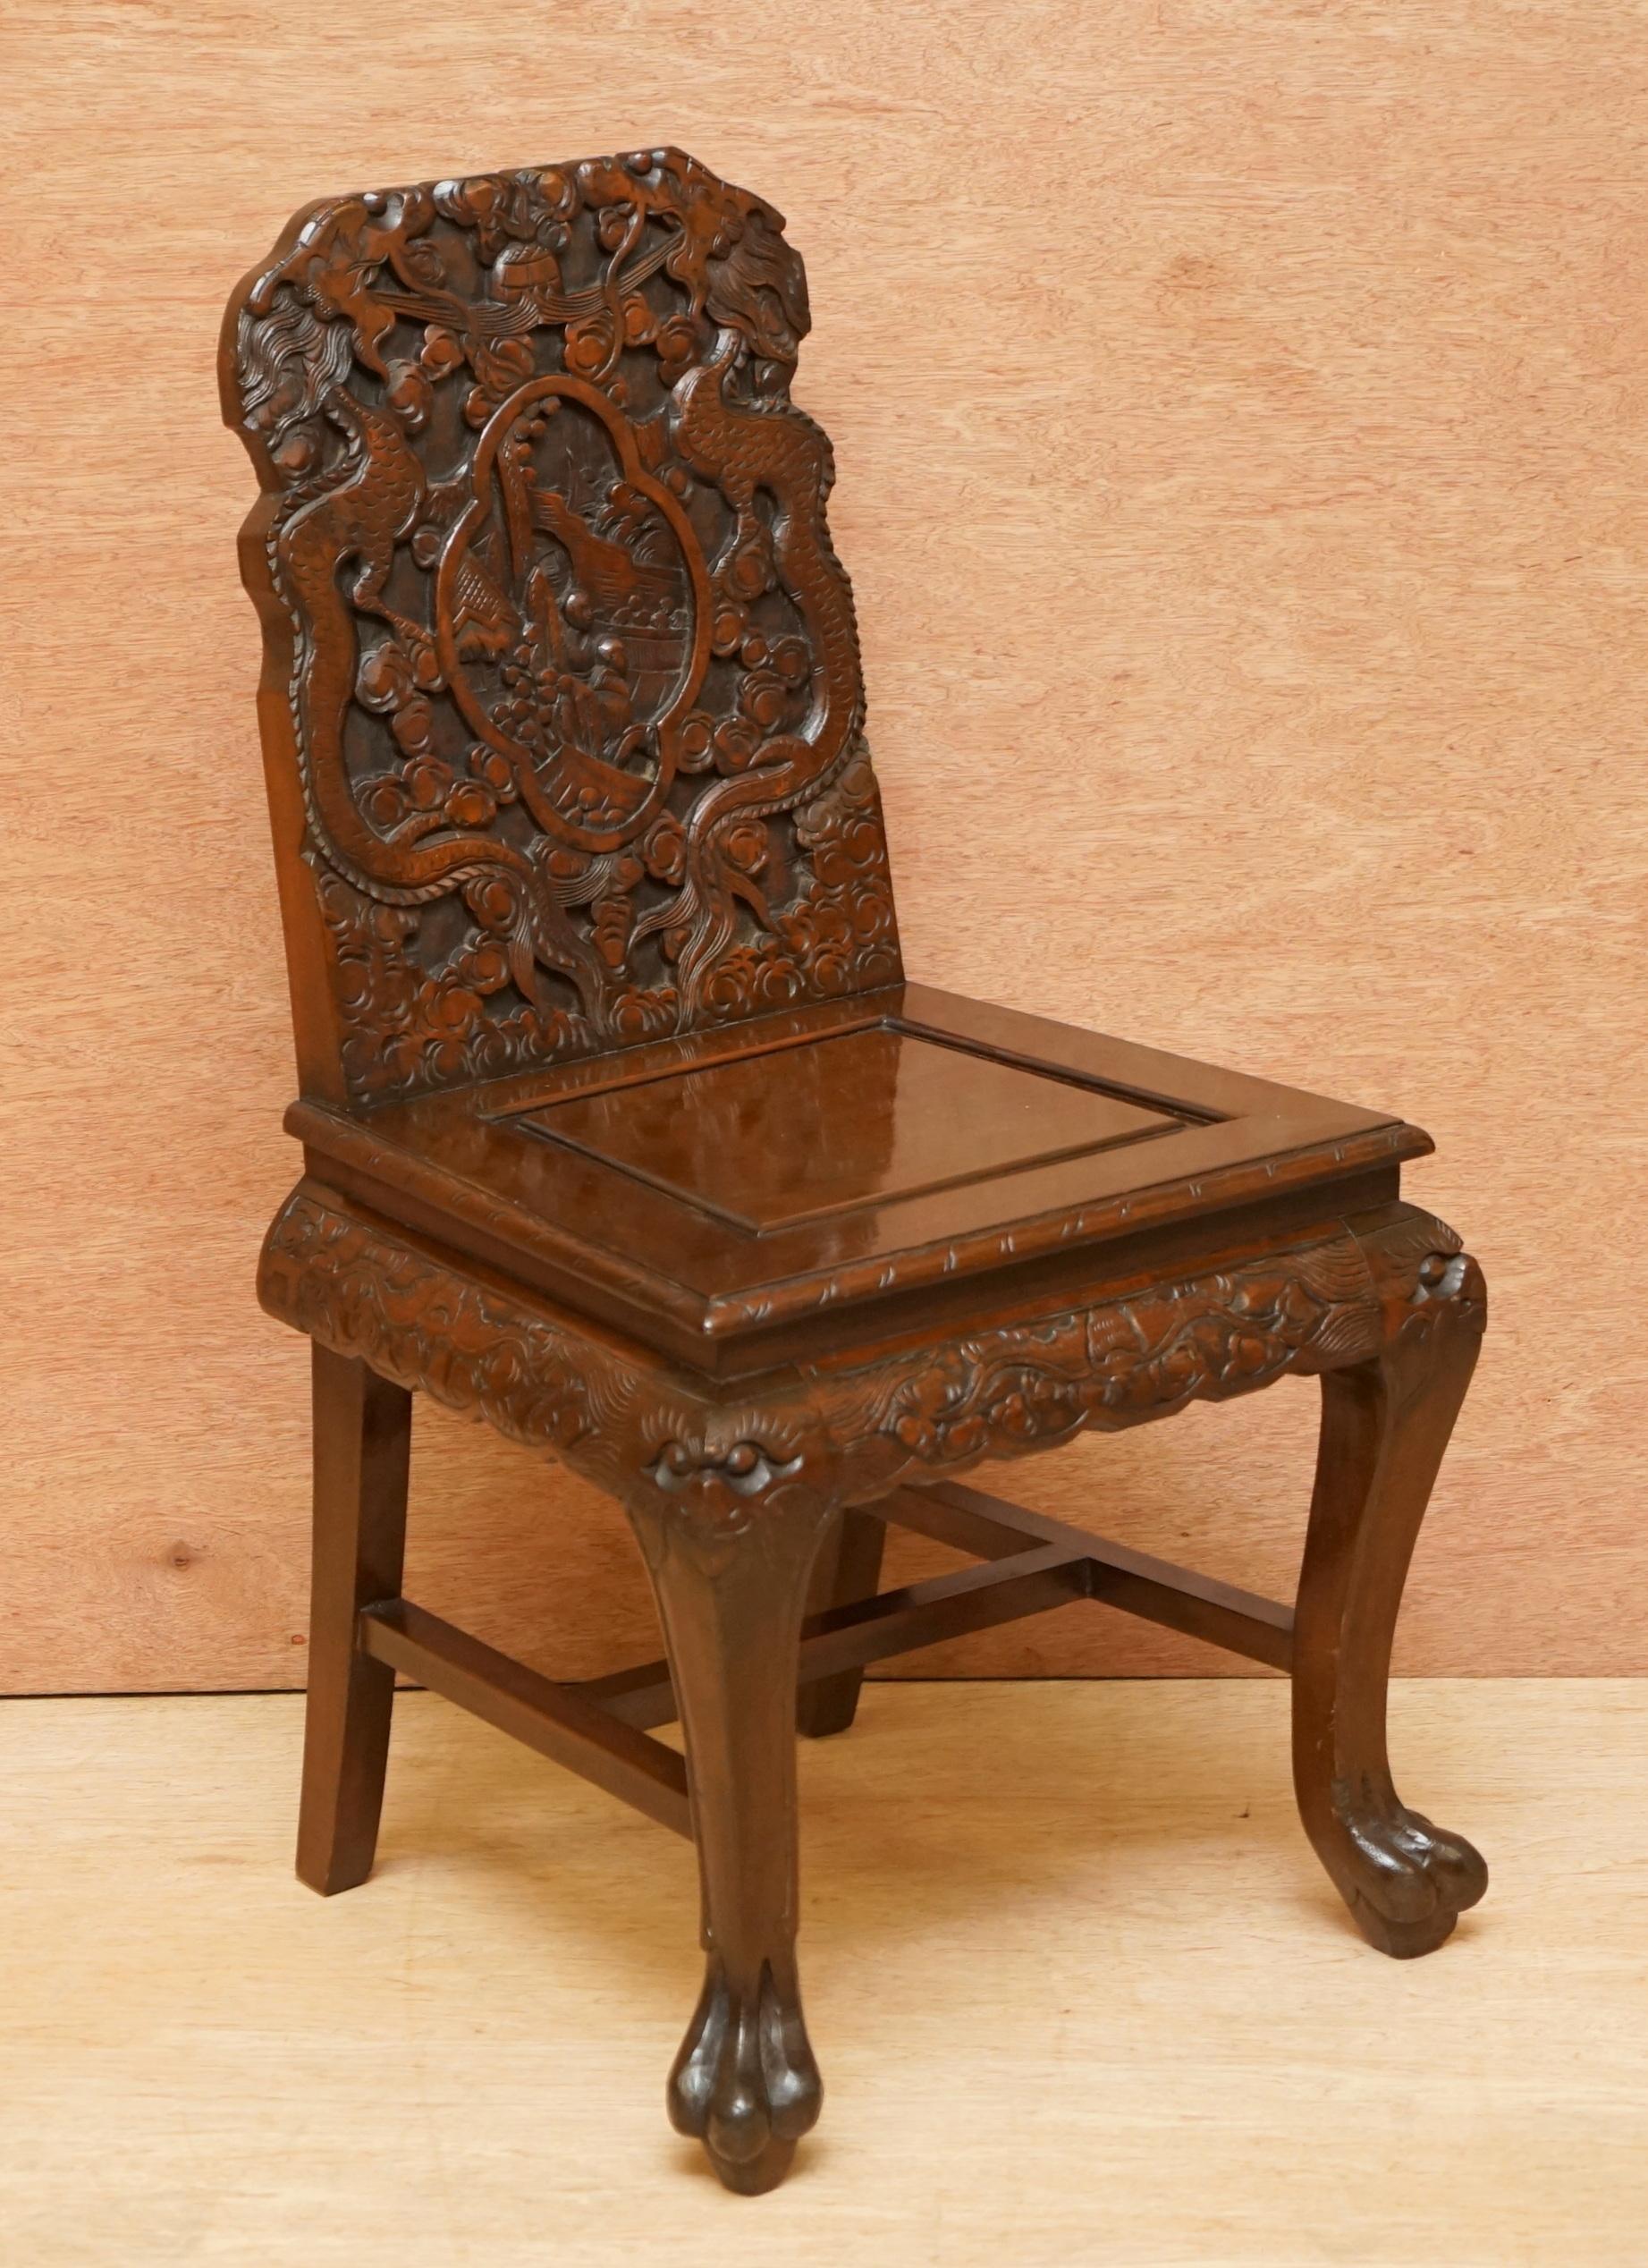 We are delighted to offer for sale this stunning suite of 4 Chinese Export circa 1900 hand carved dragon dining or occasional chairs

These are a very good looking and expertly crafted suite of dining chairs. The detail is never ending, each one